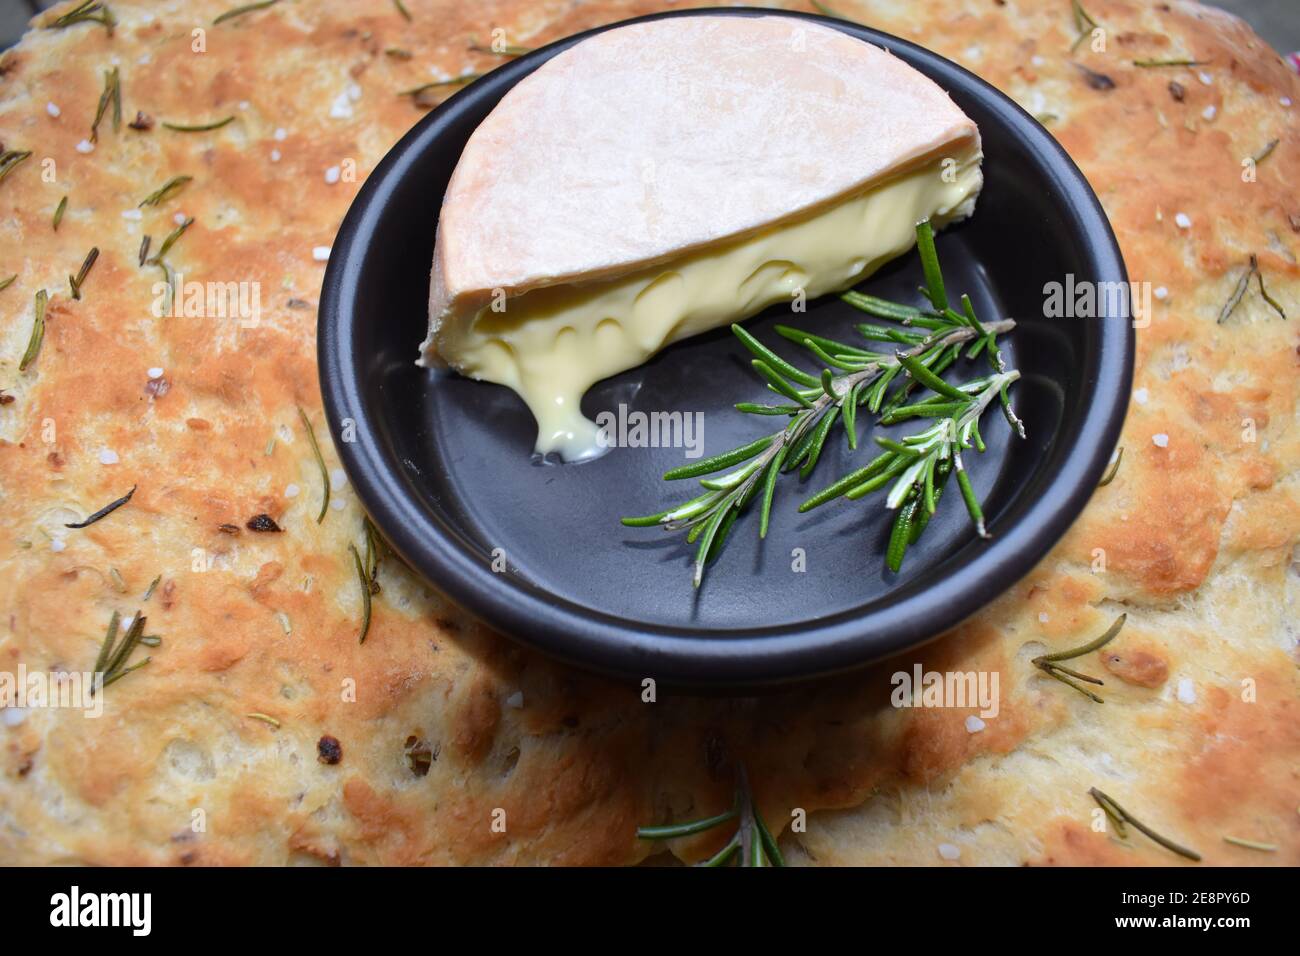 Focaccia is Italian flat bread flavoured with olive oil topped with salt and rosemary then baked and served with Welsh cider washed soft creamy cheese Stock Photo